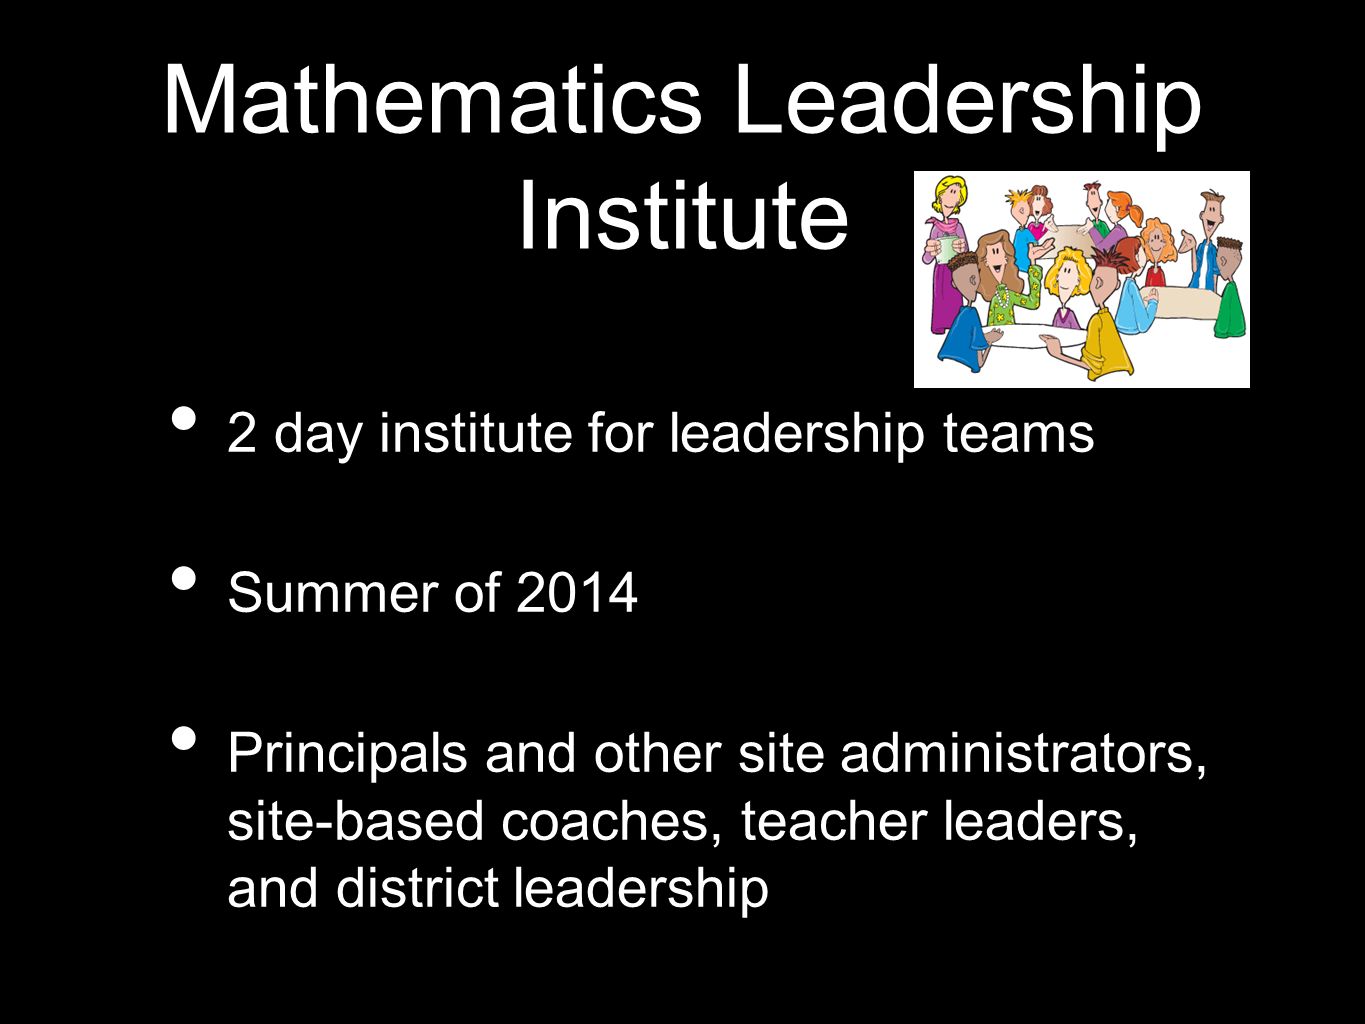 Mathematics Leadership Institute 2 day institute for leadership teams Summer of 2014 Principals and other site administrators, site-based coaches, teacher leaders, and district leadership